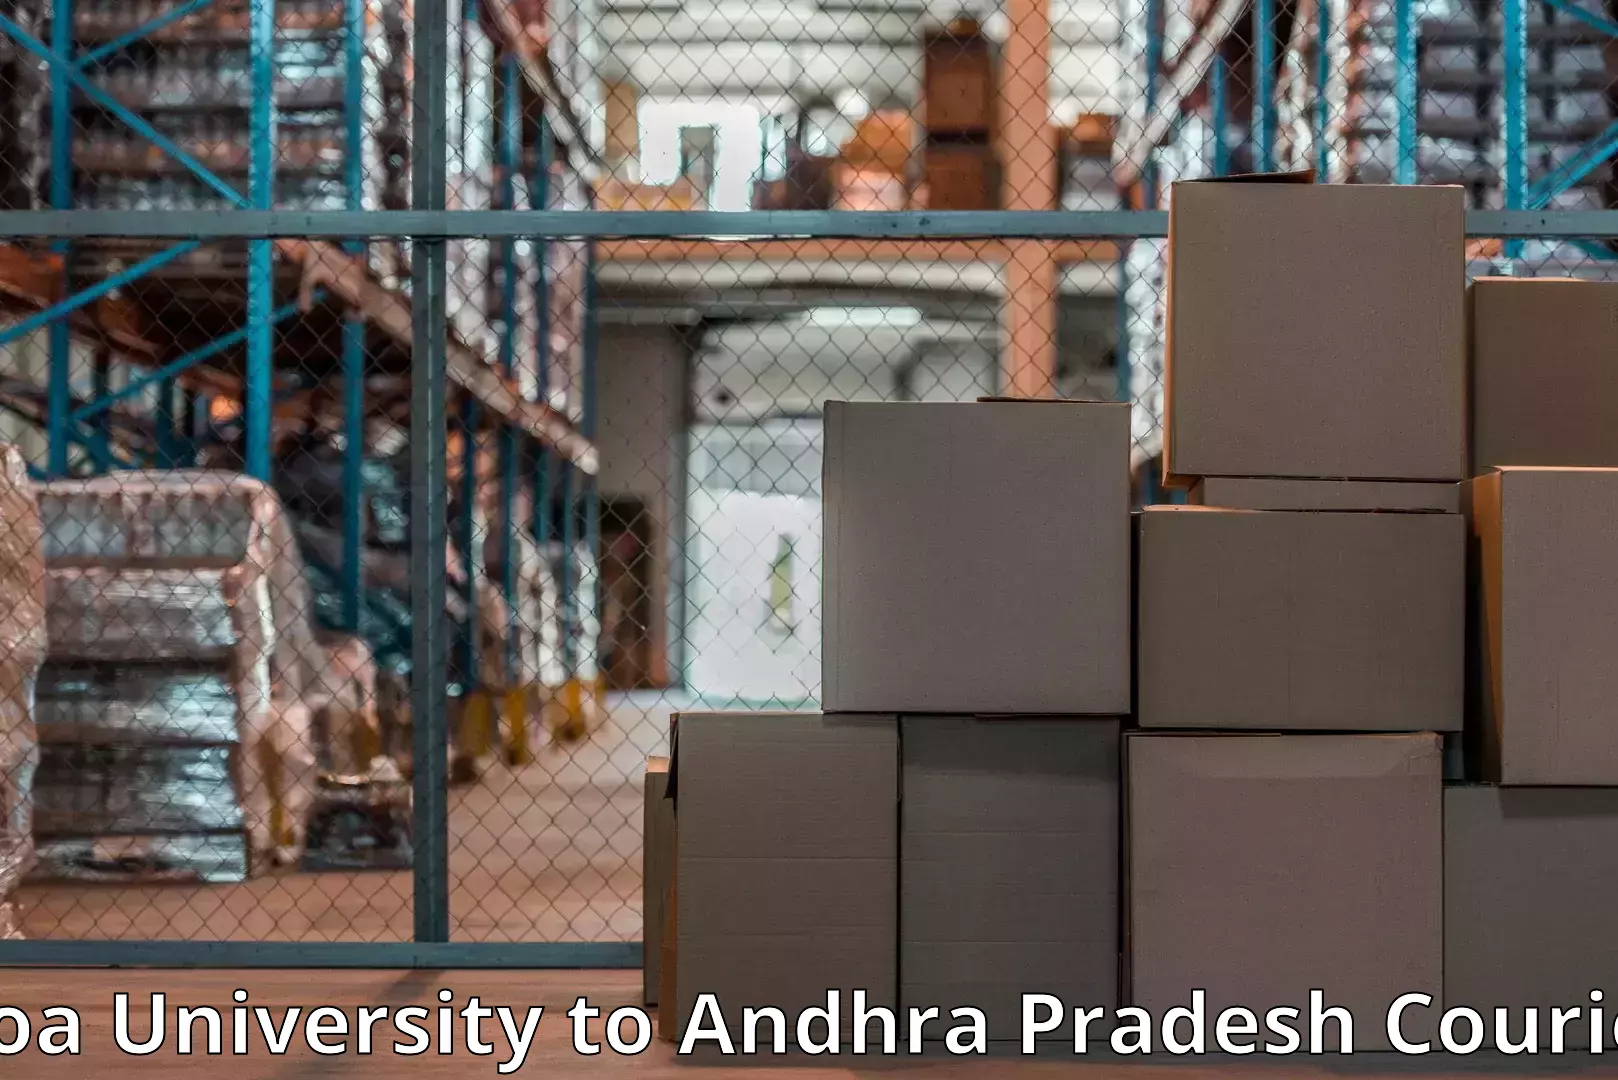 Expert moving and storage in Goa University to Addateegala